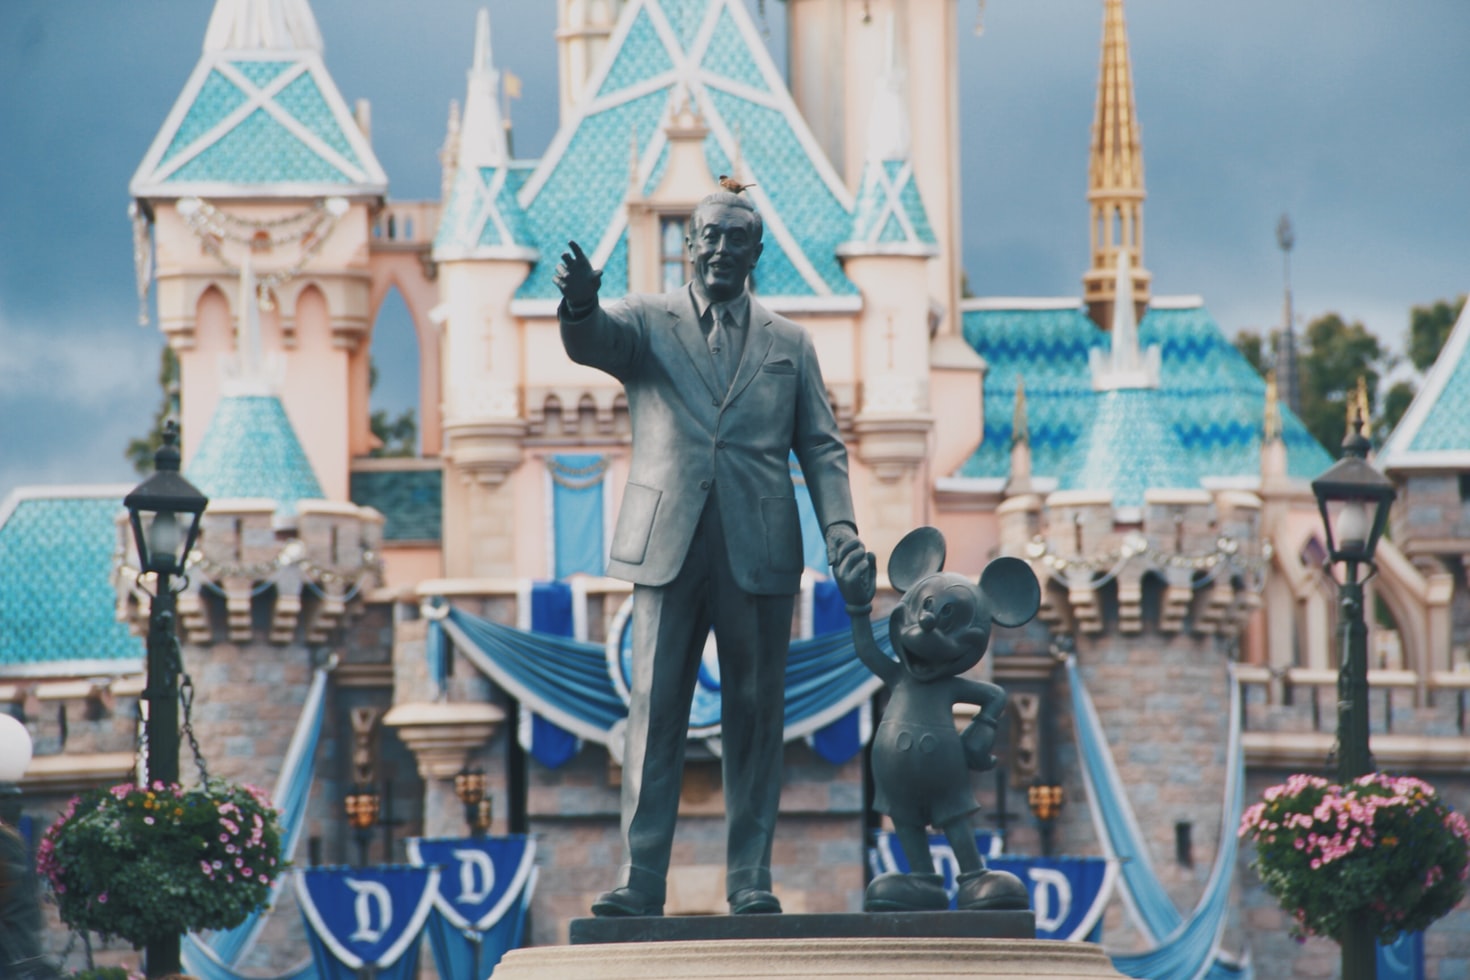 Everything you need to know about Disney Park's newest service - Find out more here!Everything you need to know about Disney Park's newest service - Find out more here!